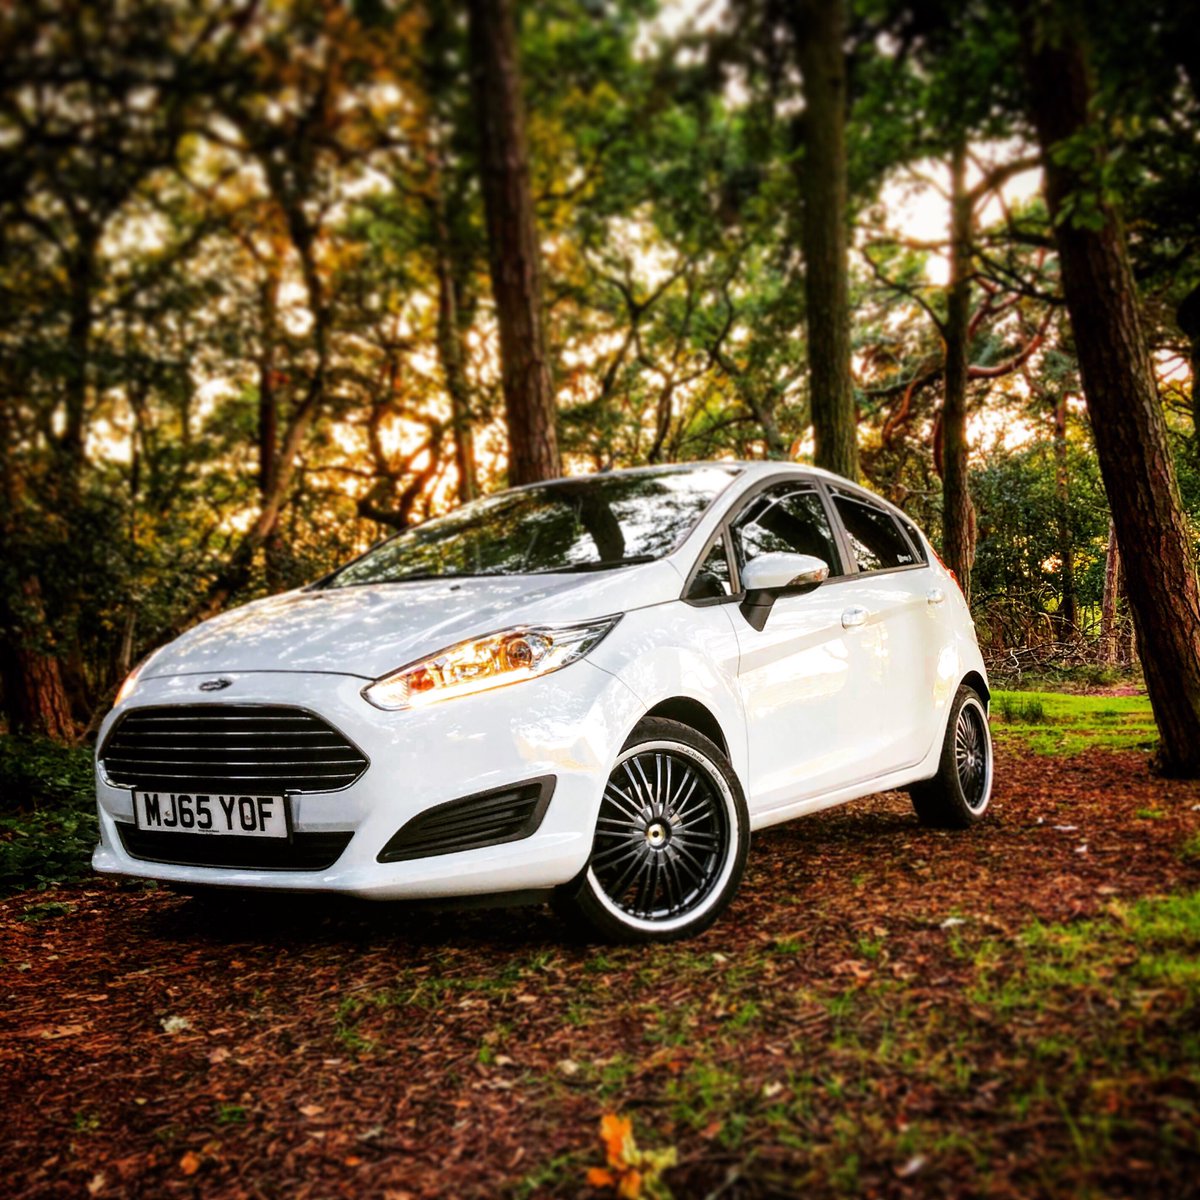 What’s Lerkin in the woods 👀🌲
#cars #car #carlifestyle #carstyle #cars4life #carsofinstagram #carsofinsta #follow #carsoftheday #ford #fordfiesta #fordfiestamk7 #mk7 #whitecars #photography #carphotoshoot #carphotography 
#carsociety #carlife #carenthusiast #likeforlike